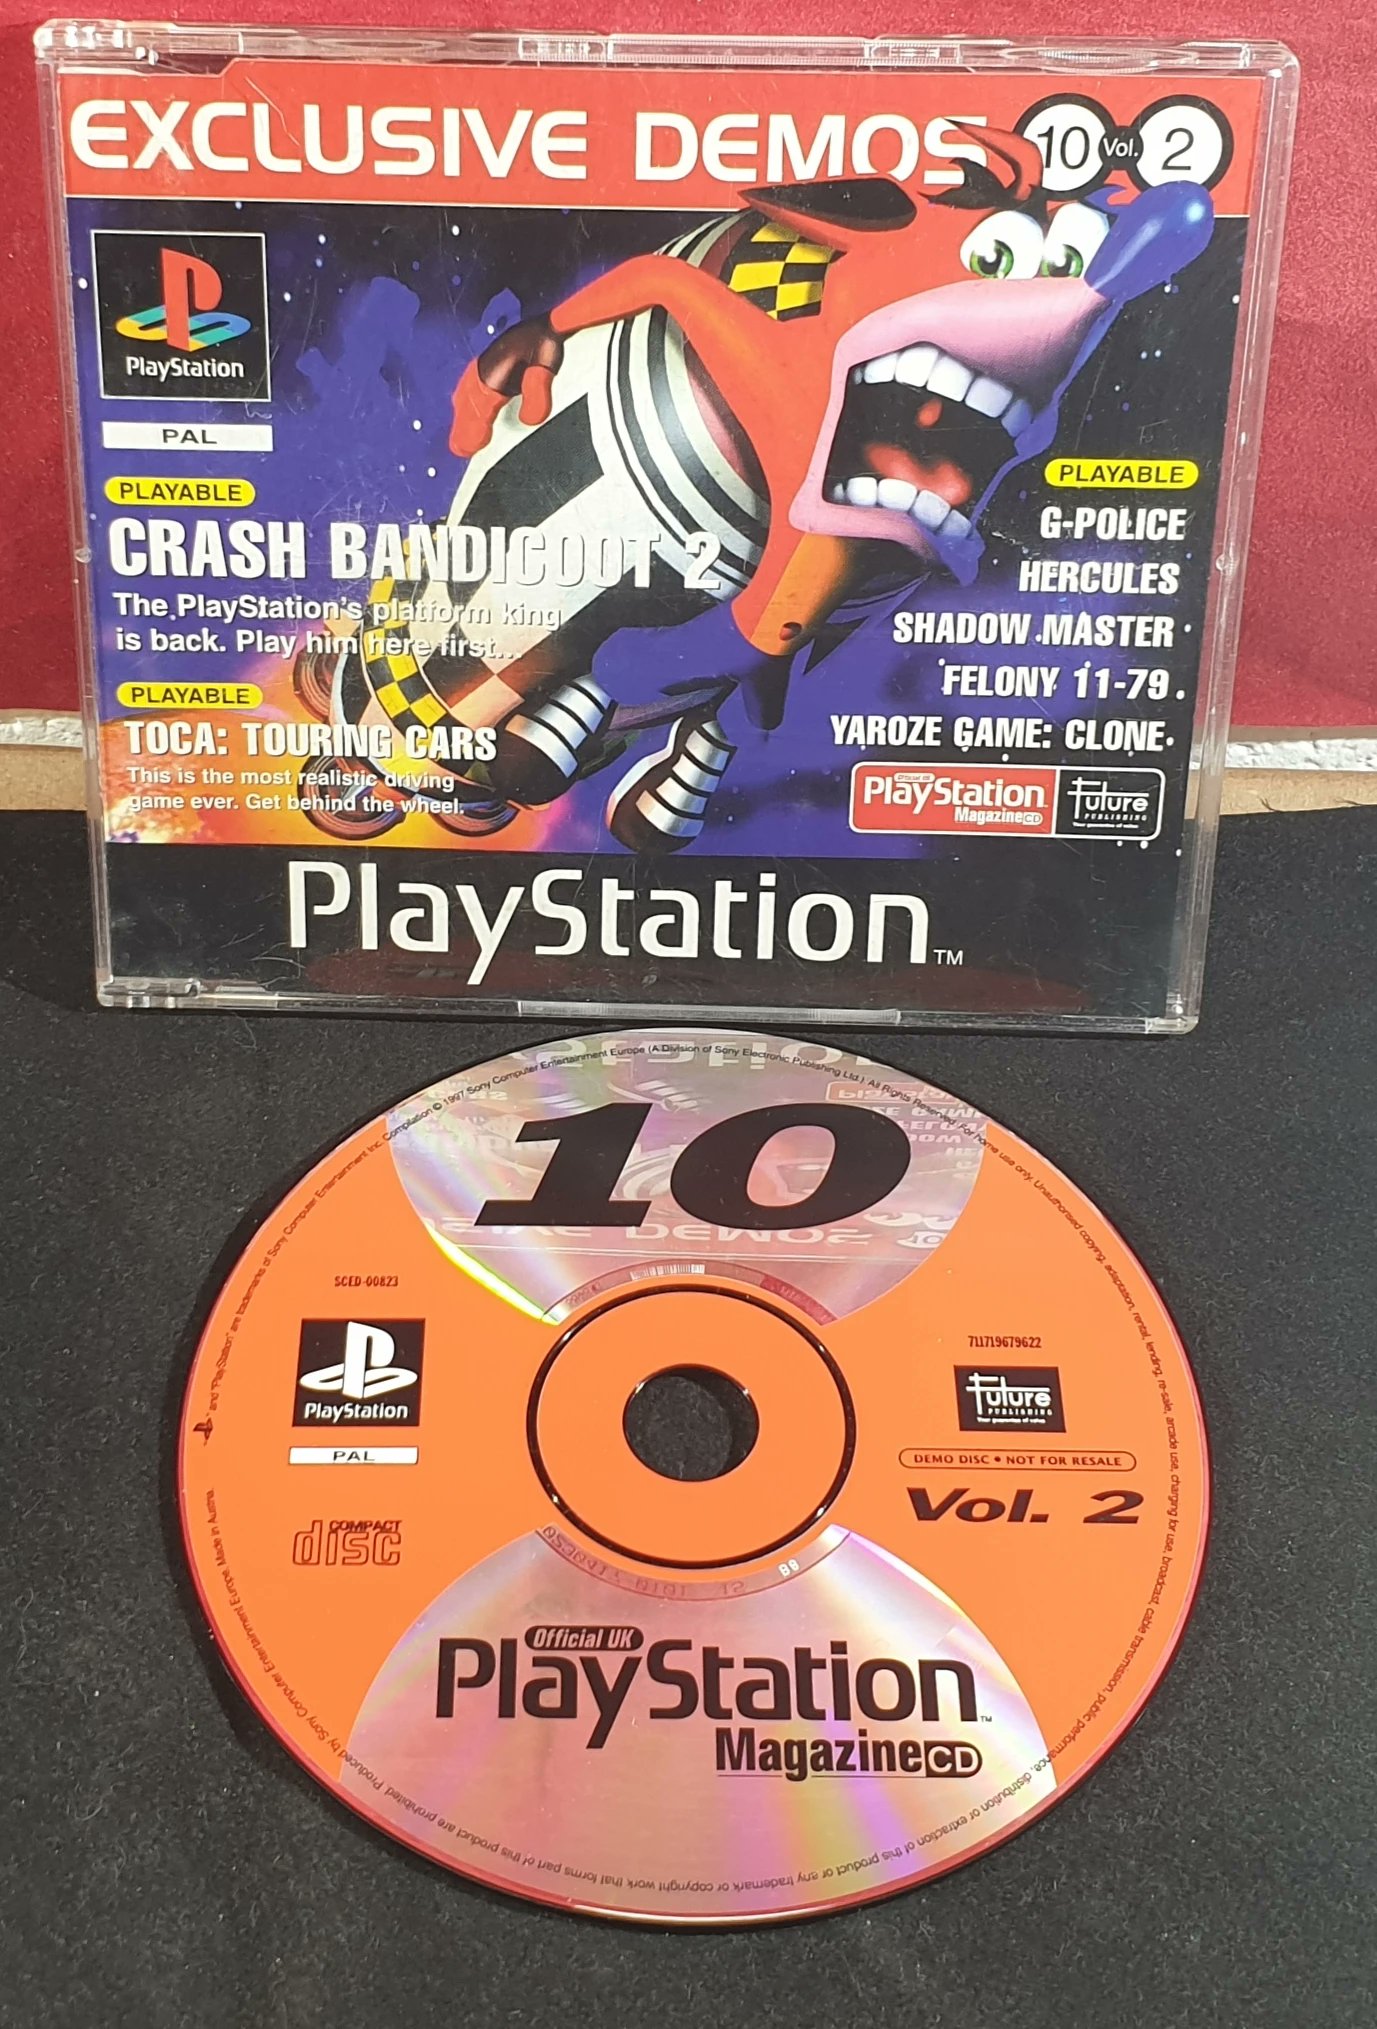 All Gaming 🎮🕹 on Twitter: exciting it testing out future releases on a demo disc 🤩🎮 #Sony #Playstation #PS1 #Demo #Disc #DemoDisc https://t.co/pdABzM4mH0" / Twitter